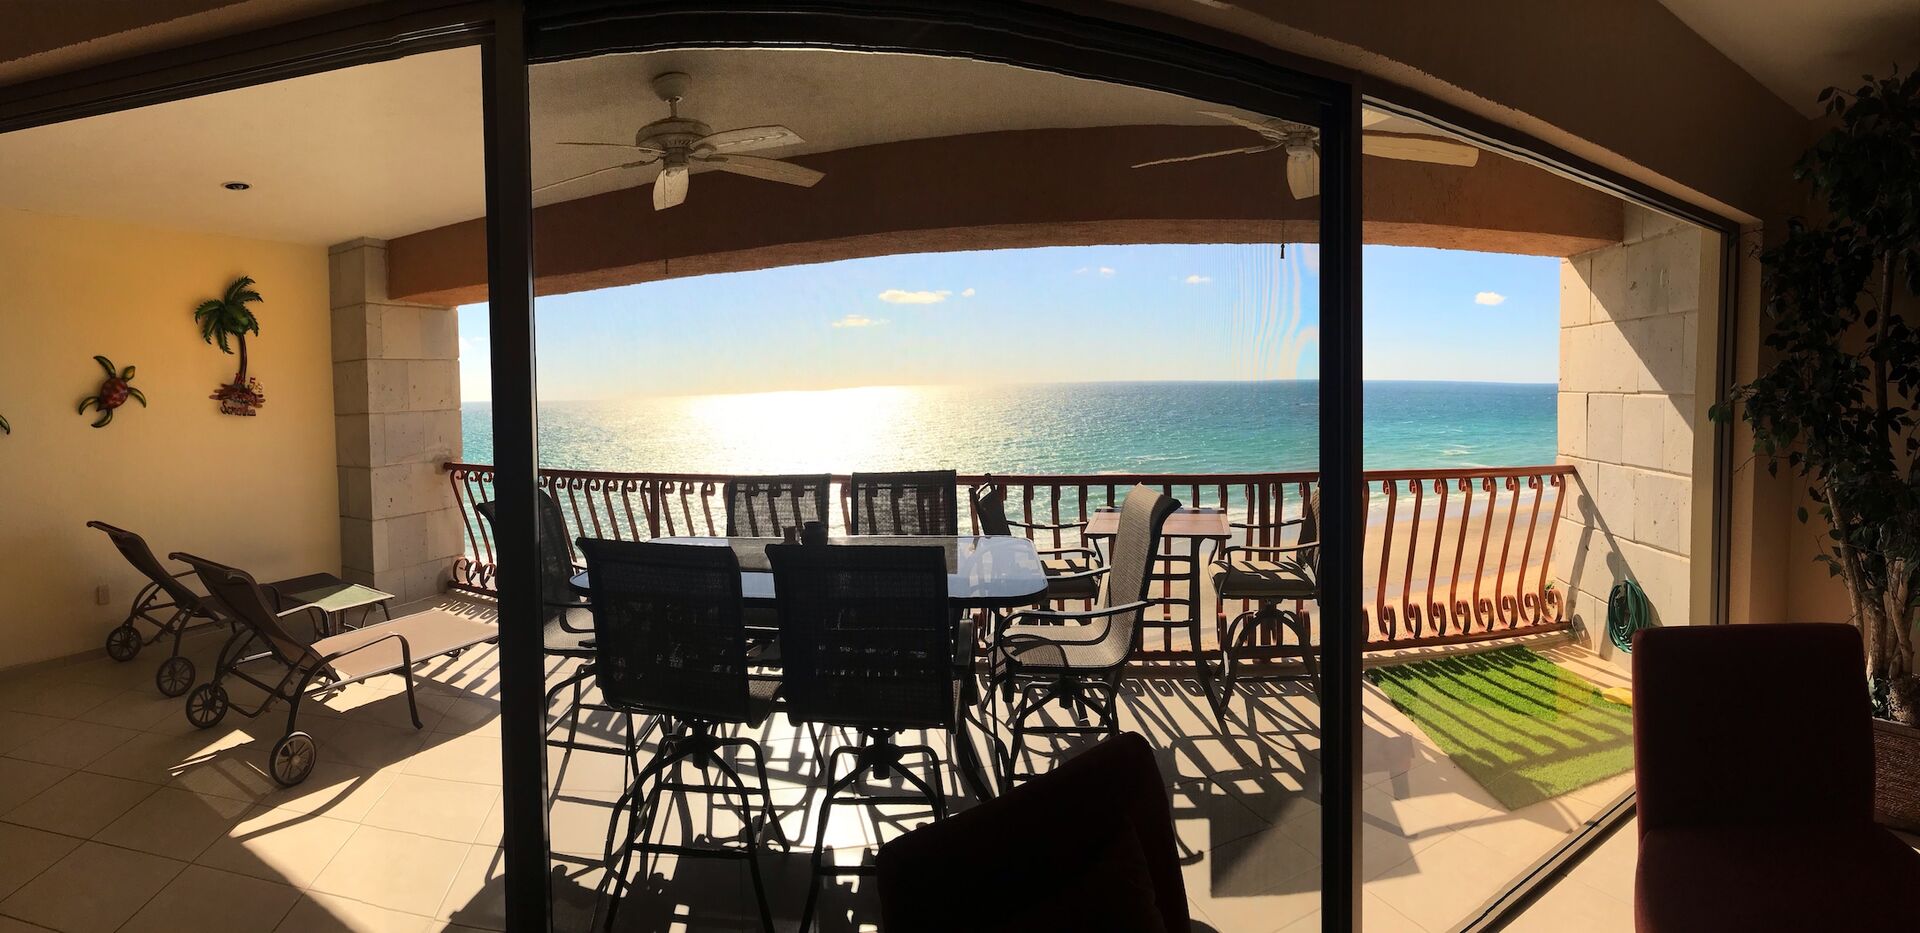 The patio with views of the Sea of Cortez beyond